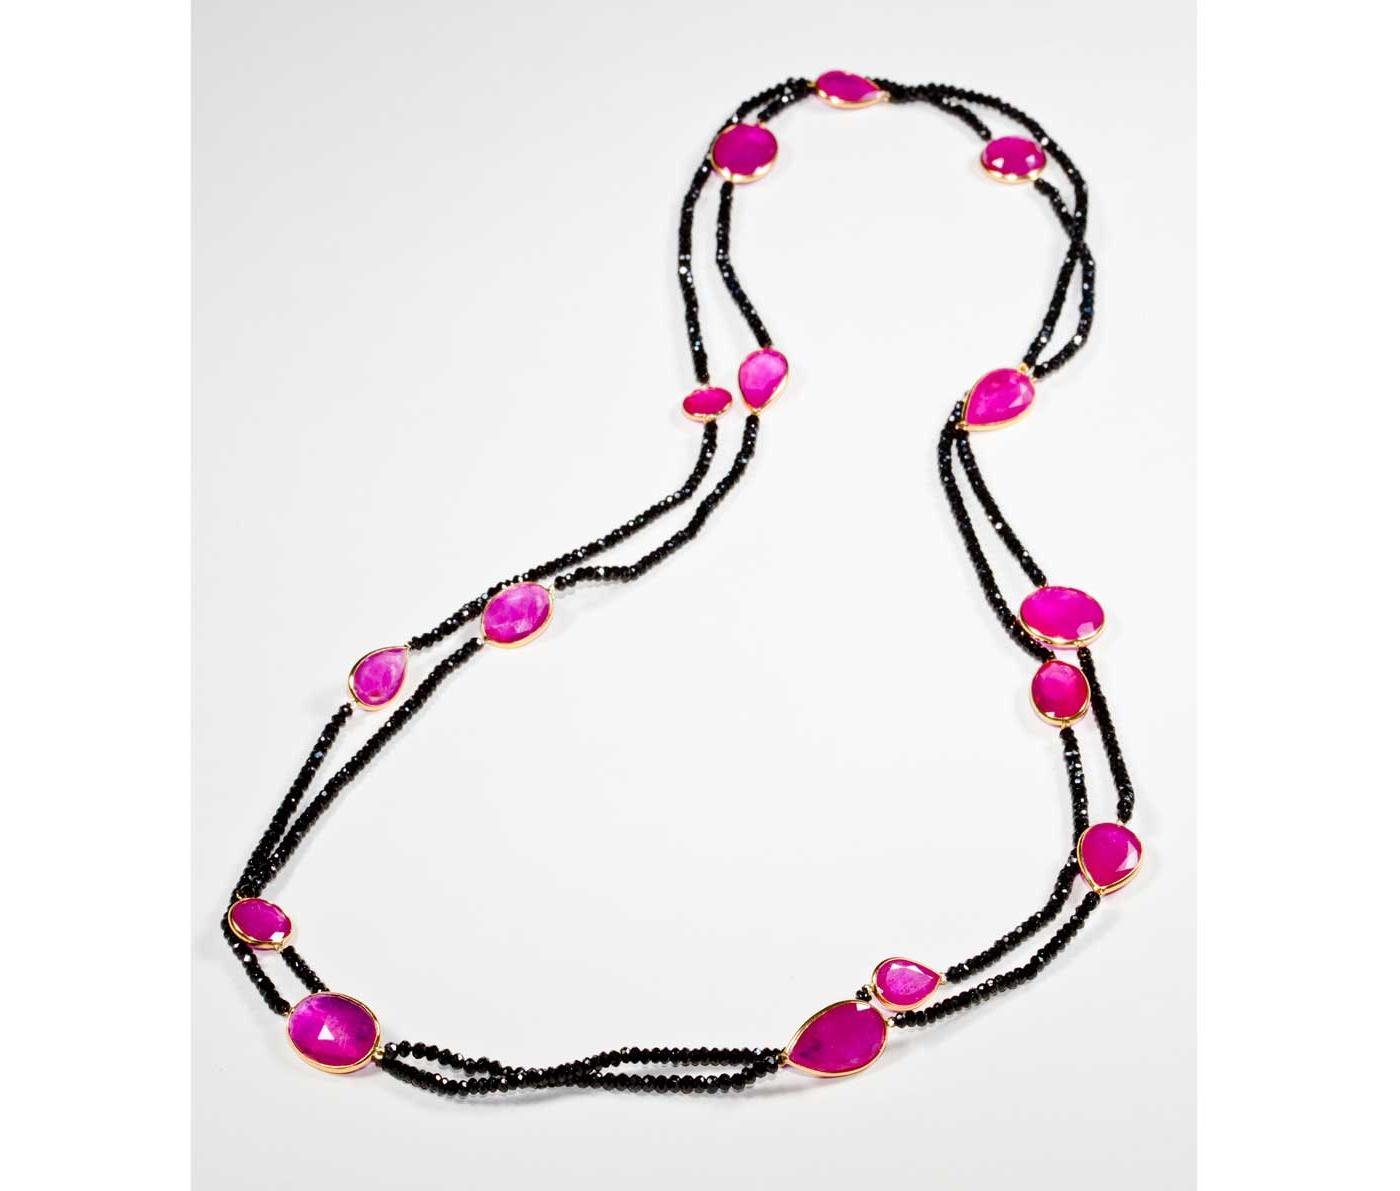 Necklace by Rina Limor